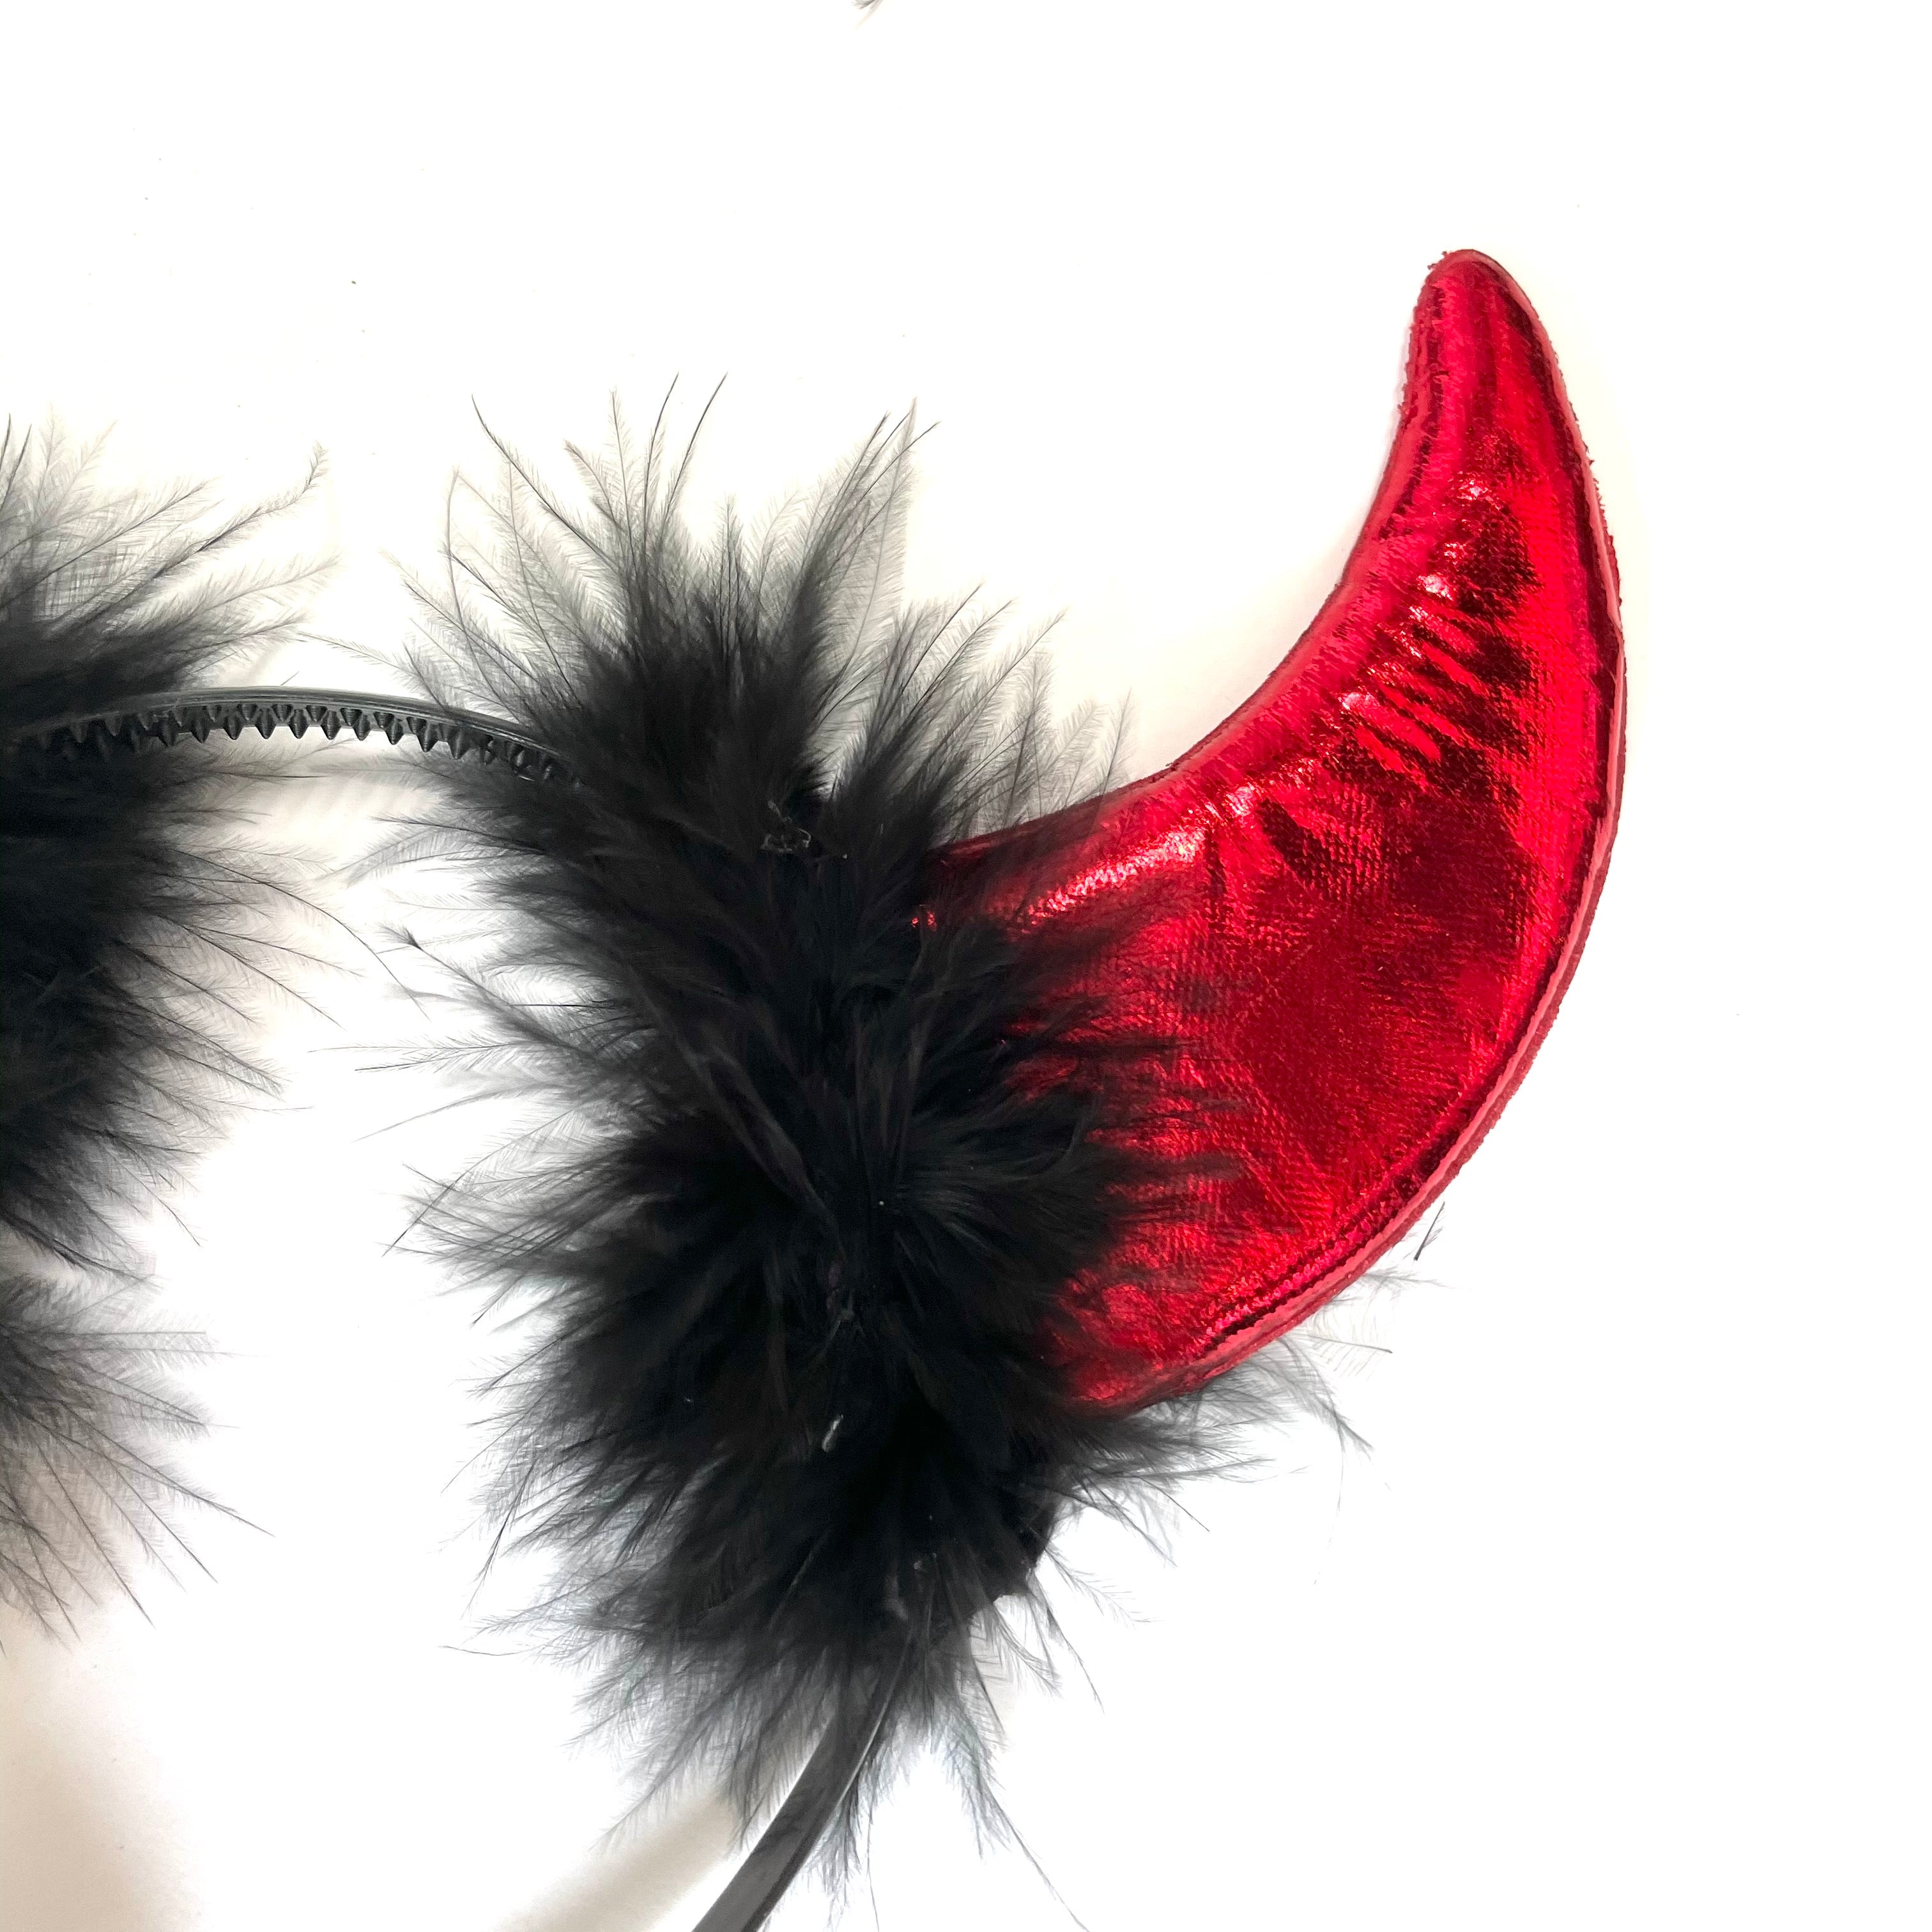 Feathered Devil Horn Costume Party Headband - Red (Style 2)